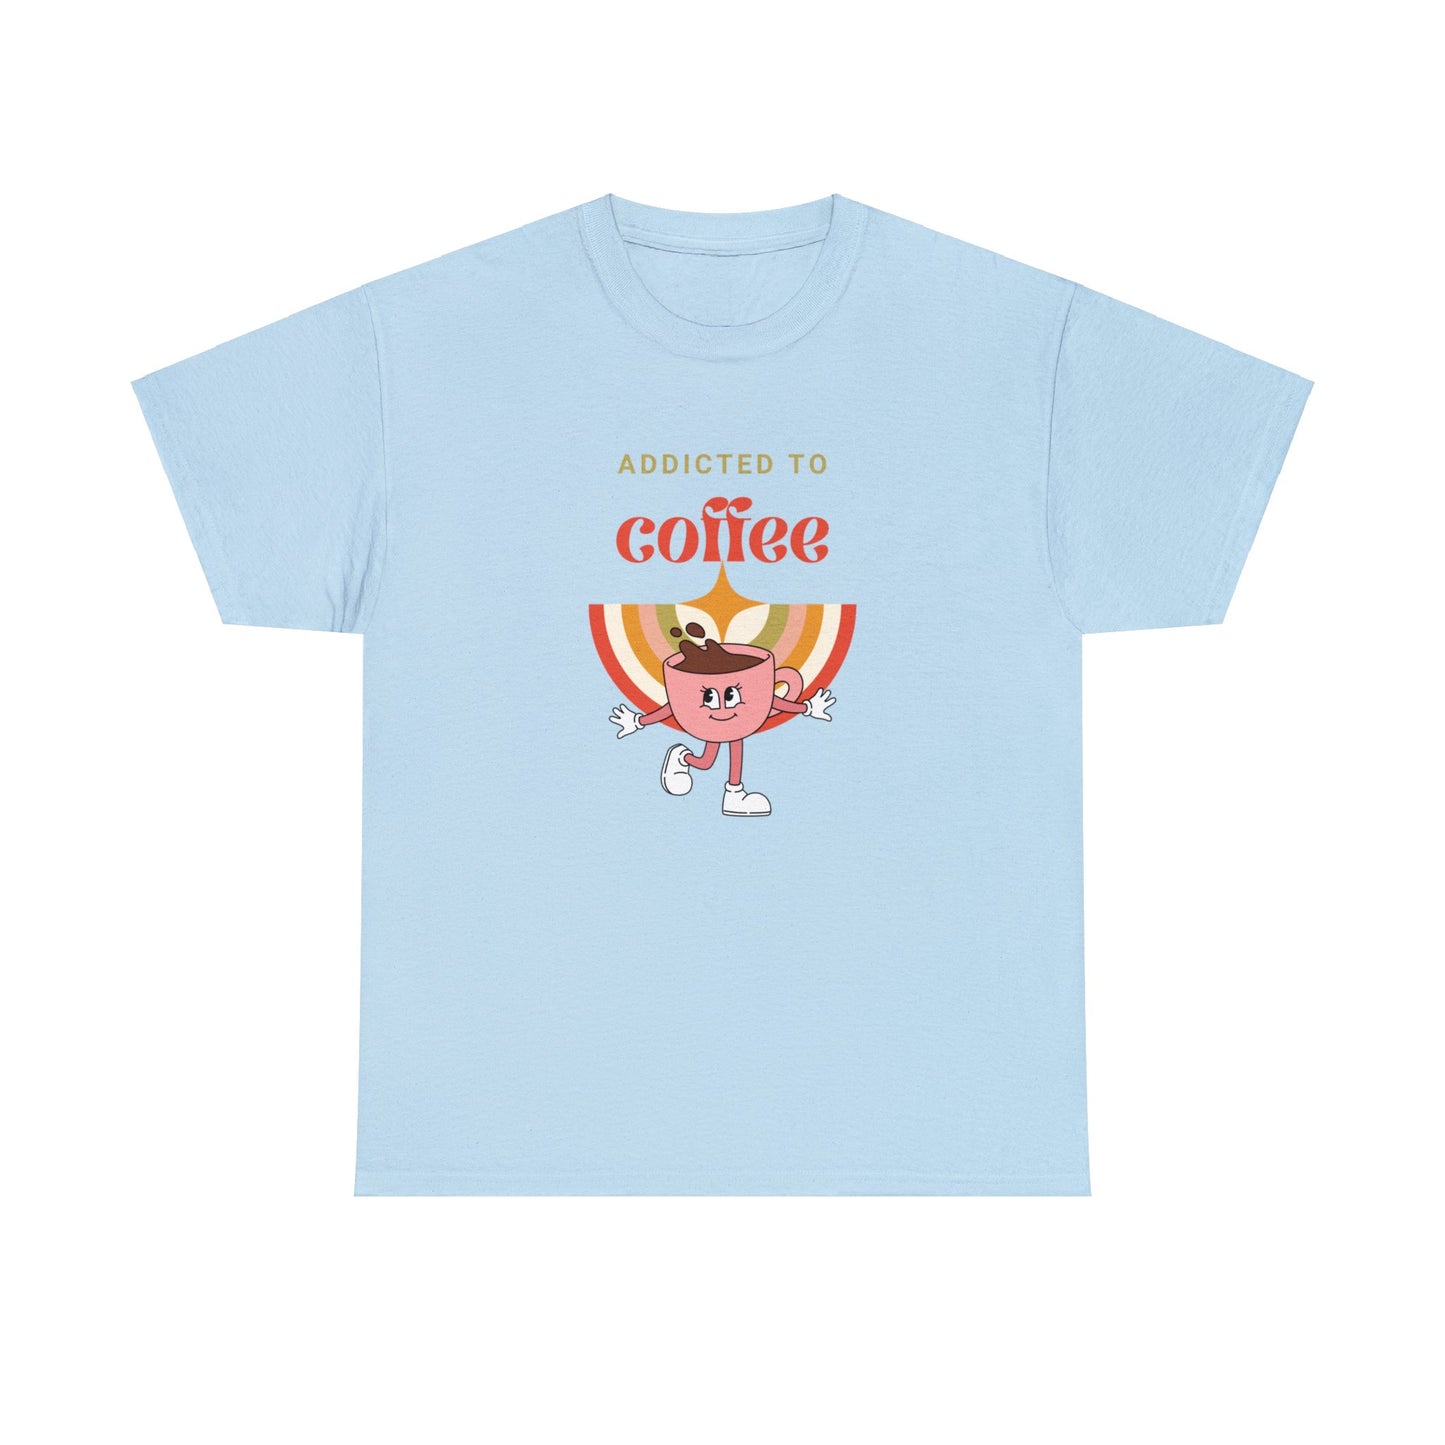 ADDICTED TO COFFEE retro t-shirt in English - adult